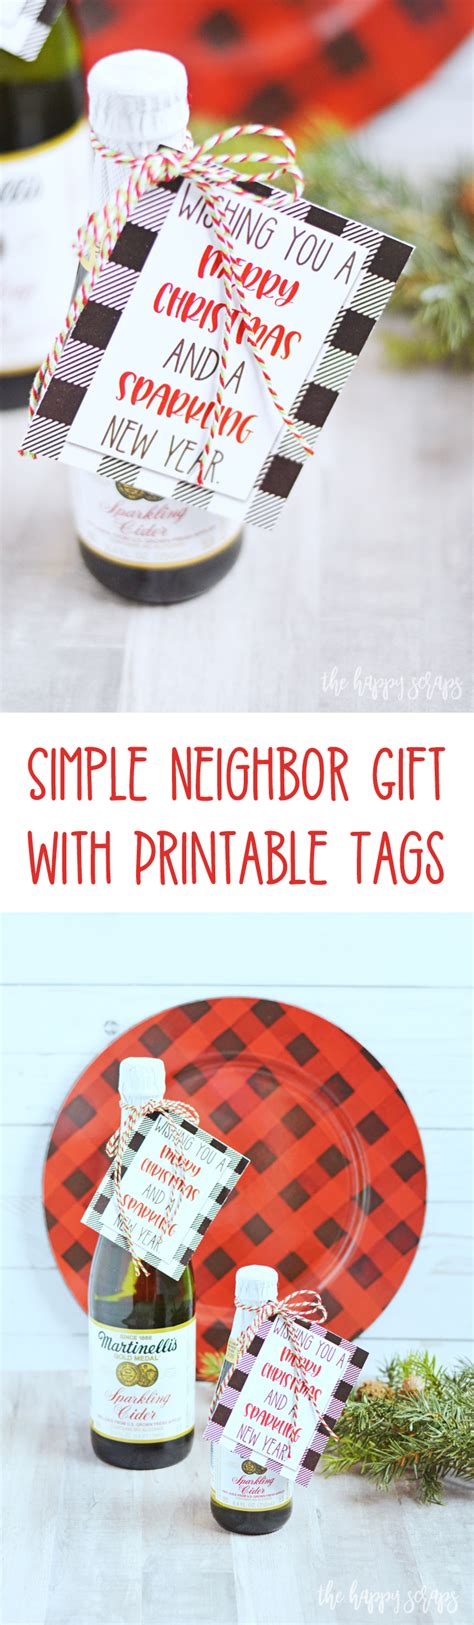 simple neighbor t with printable tags the happy scraps